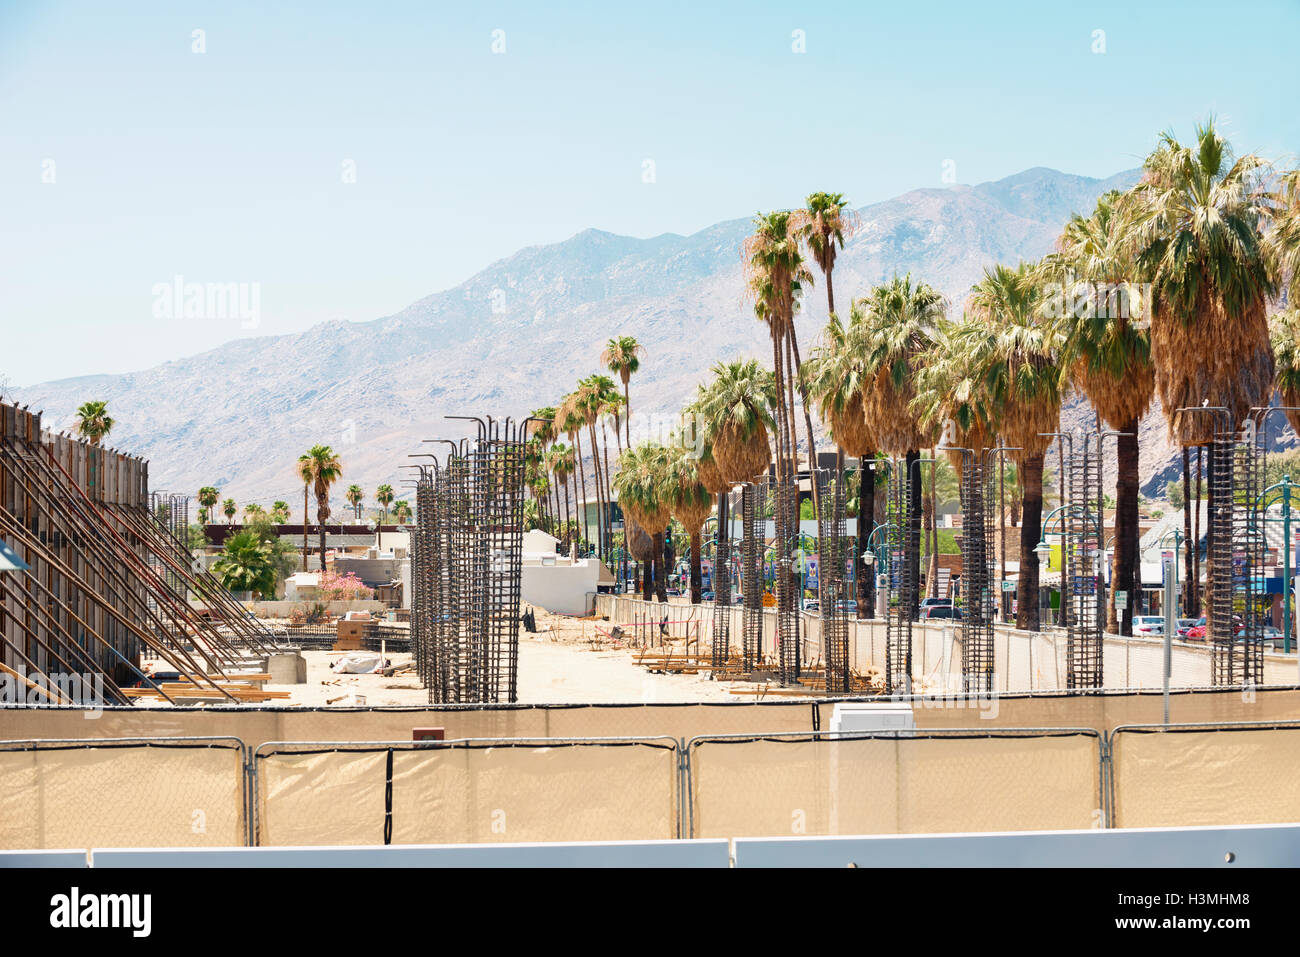 Downtown Palm Springs California construction of shopping center and Kimpton hotel Palm Springs Stock Photo